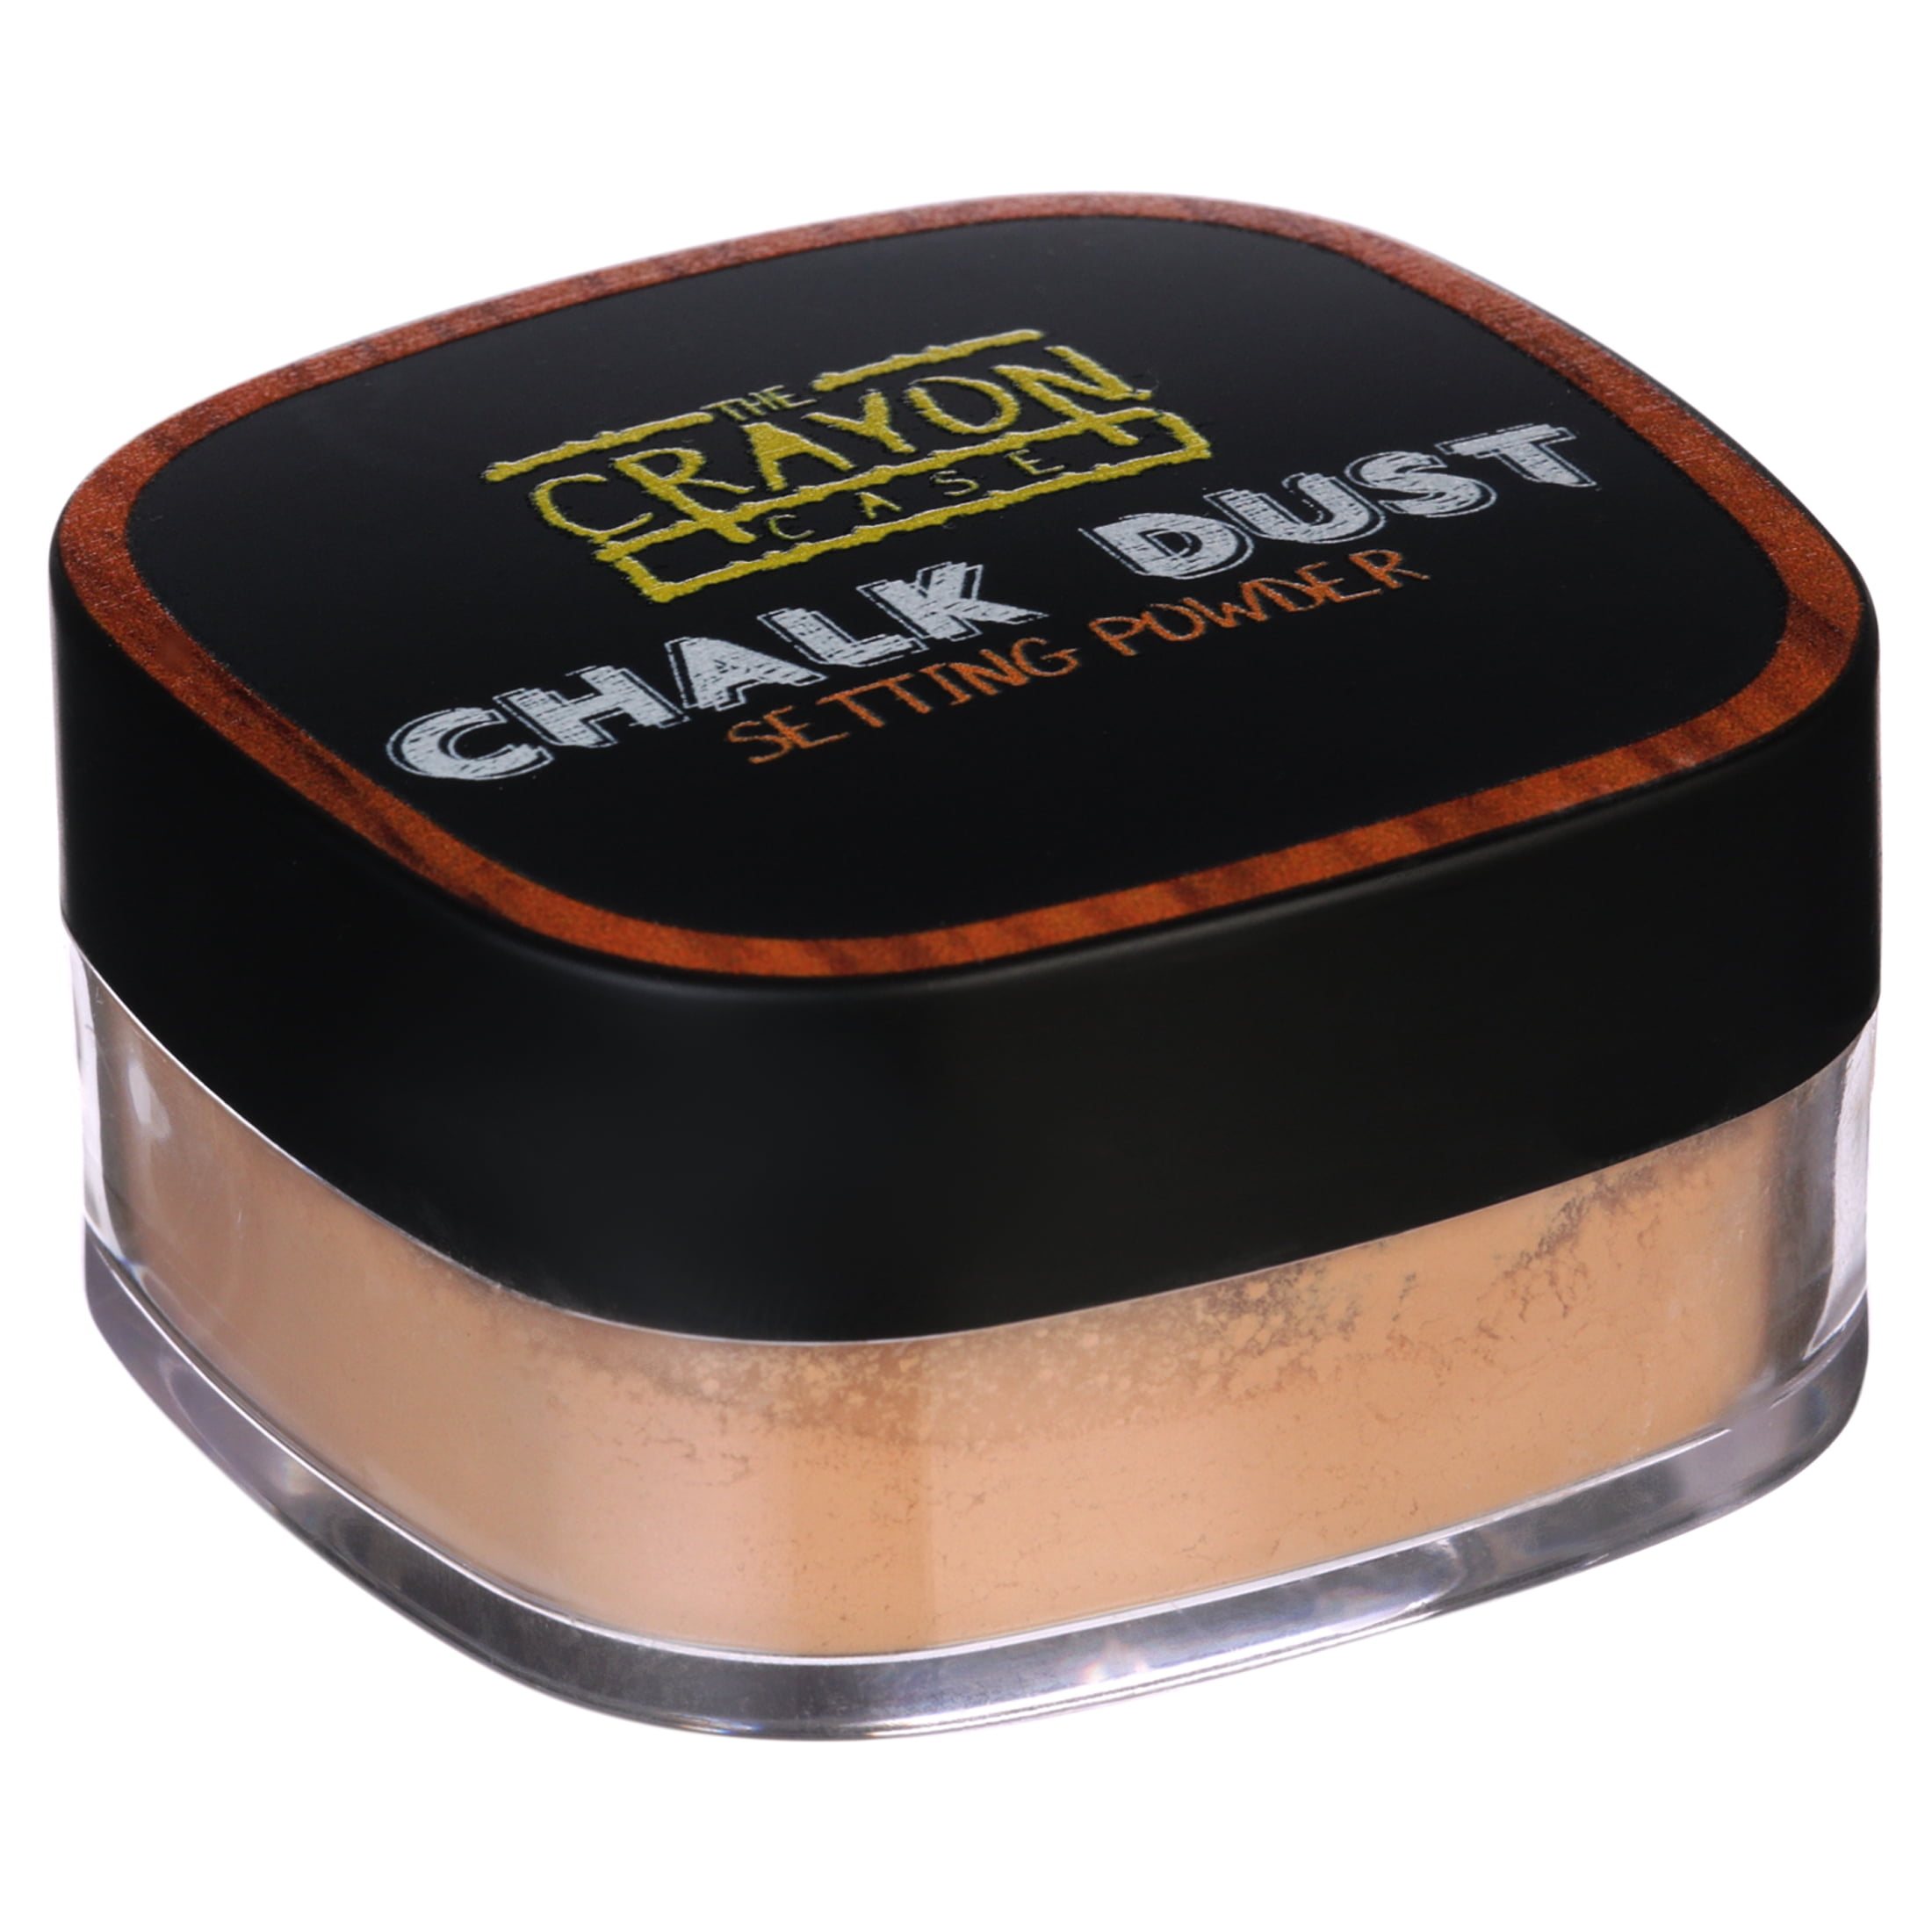 The Crayon Case Chalk Dust Setting Powder Makeup #Y New Sealed - 2